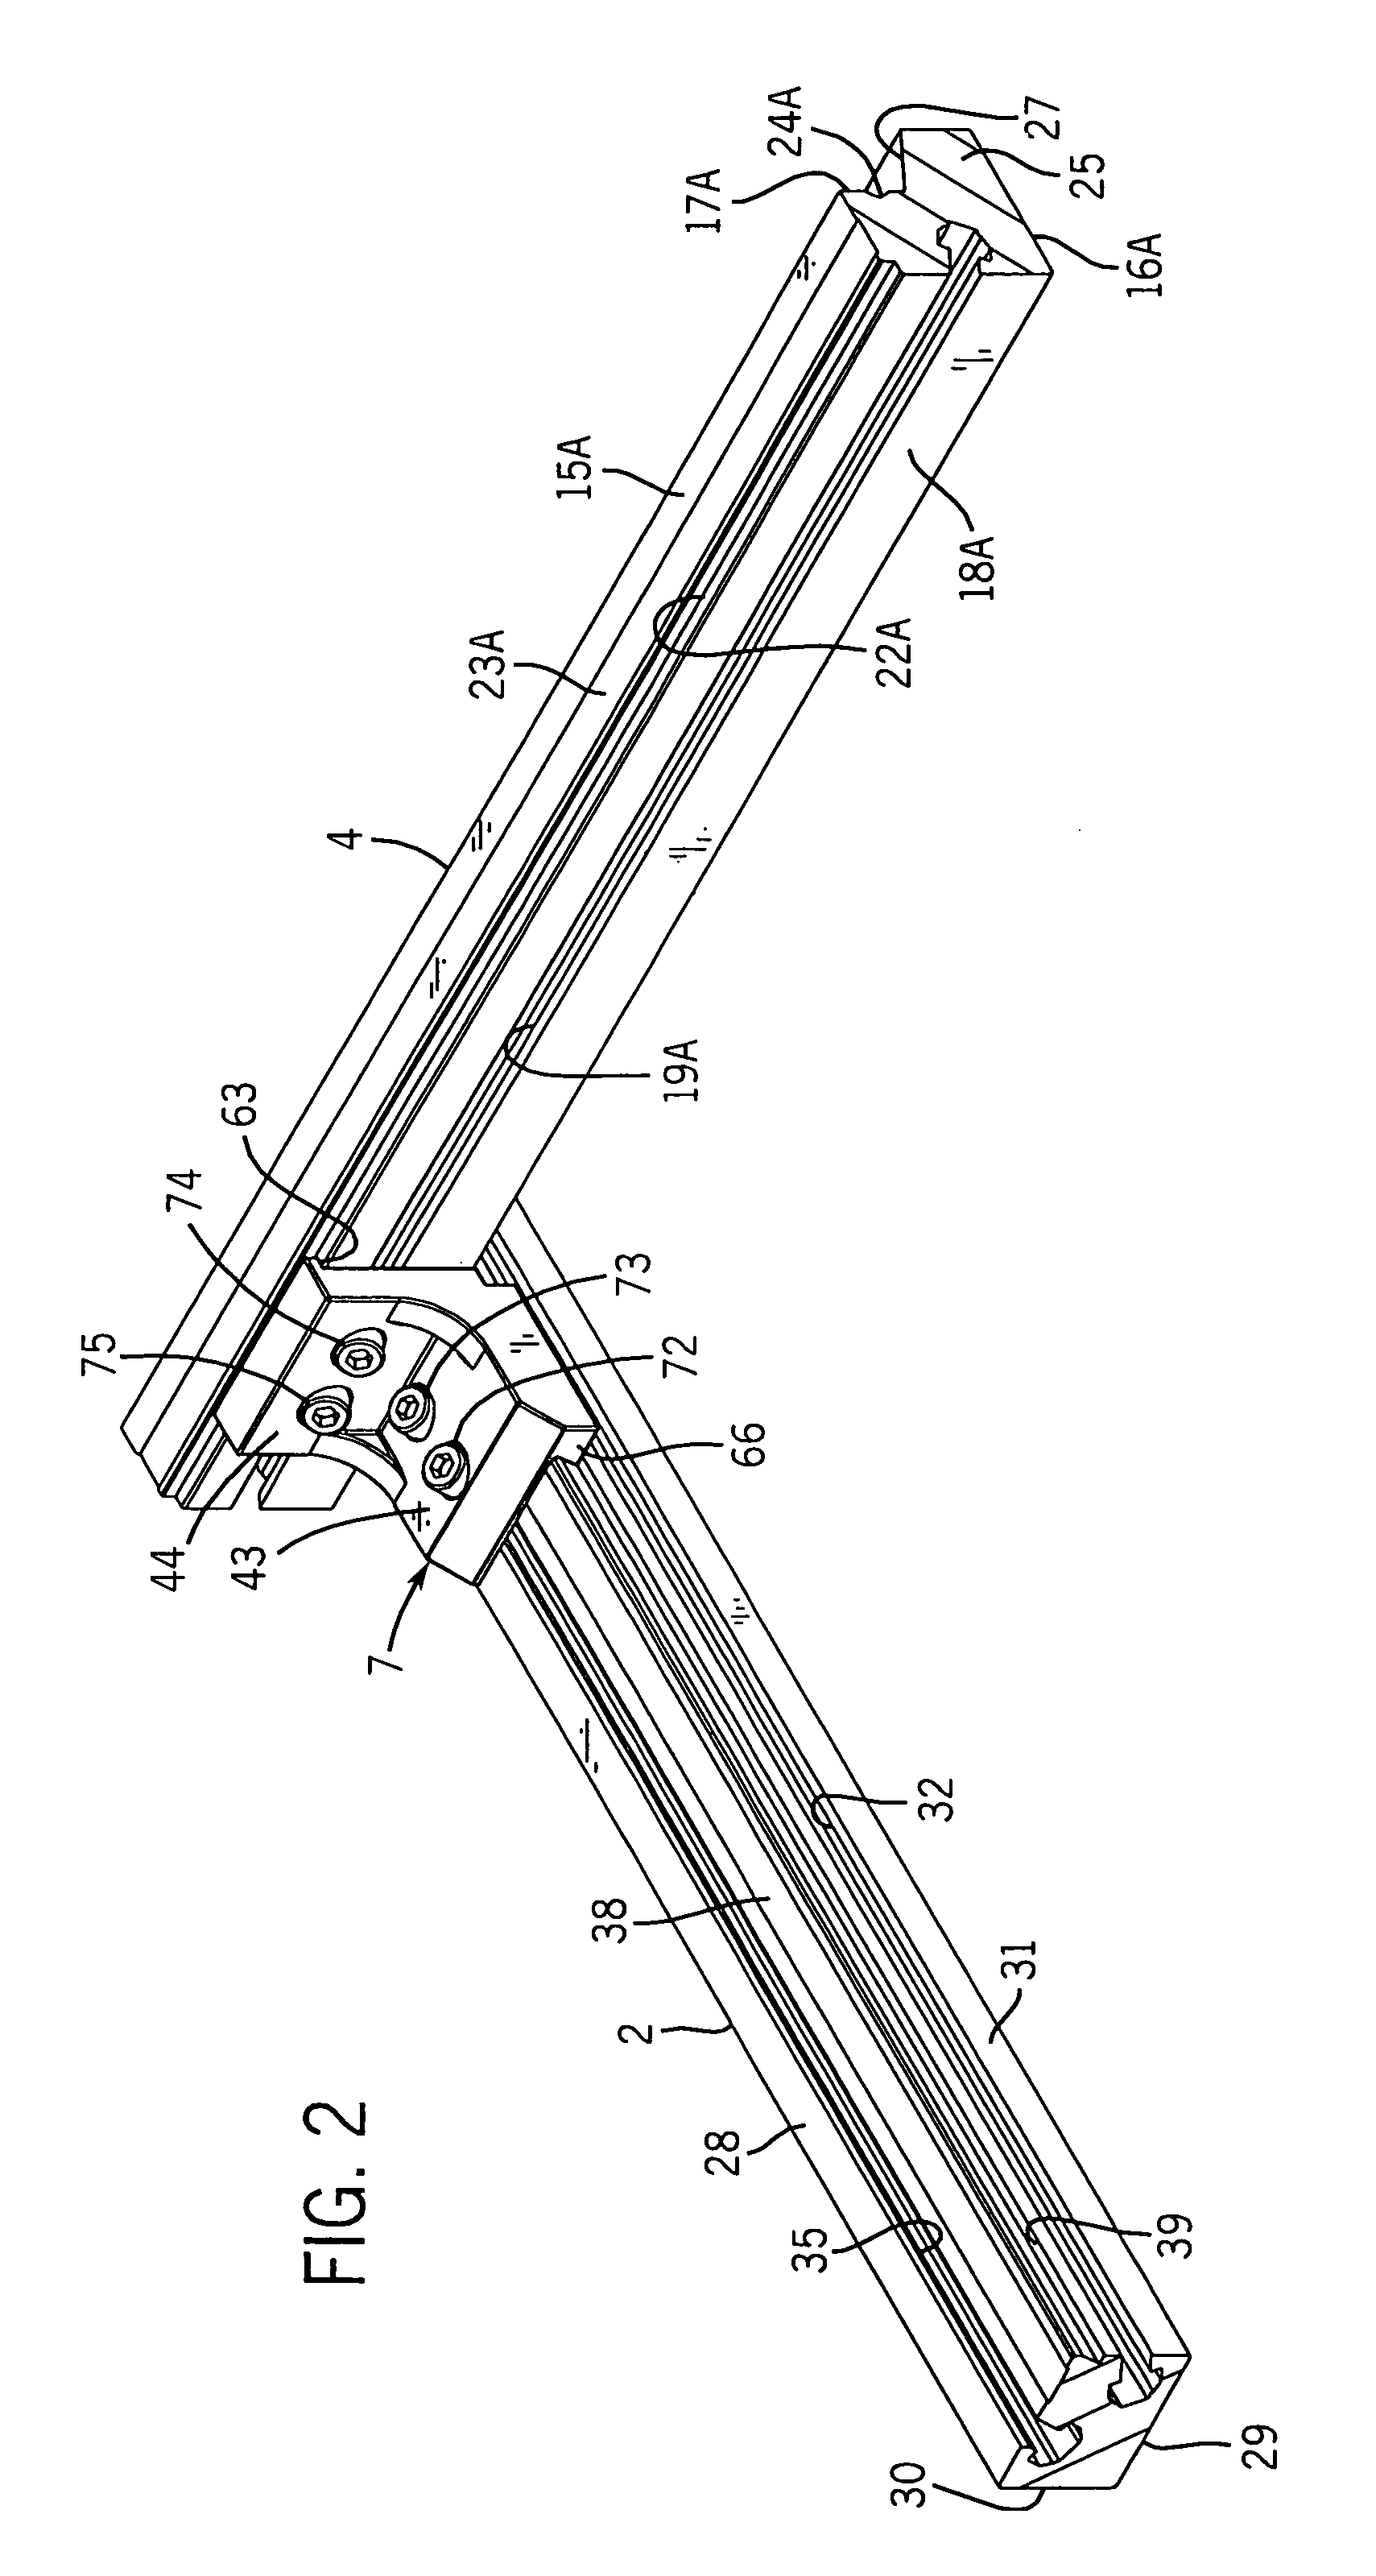 Locator bracket for the lower frame assembly of a blanking tool